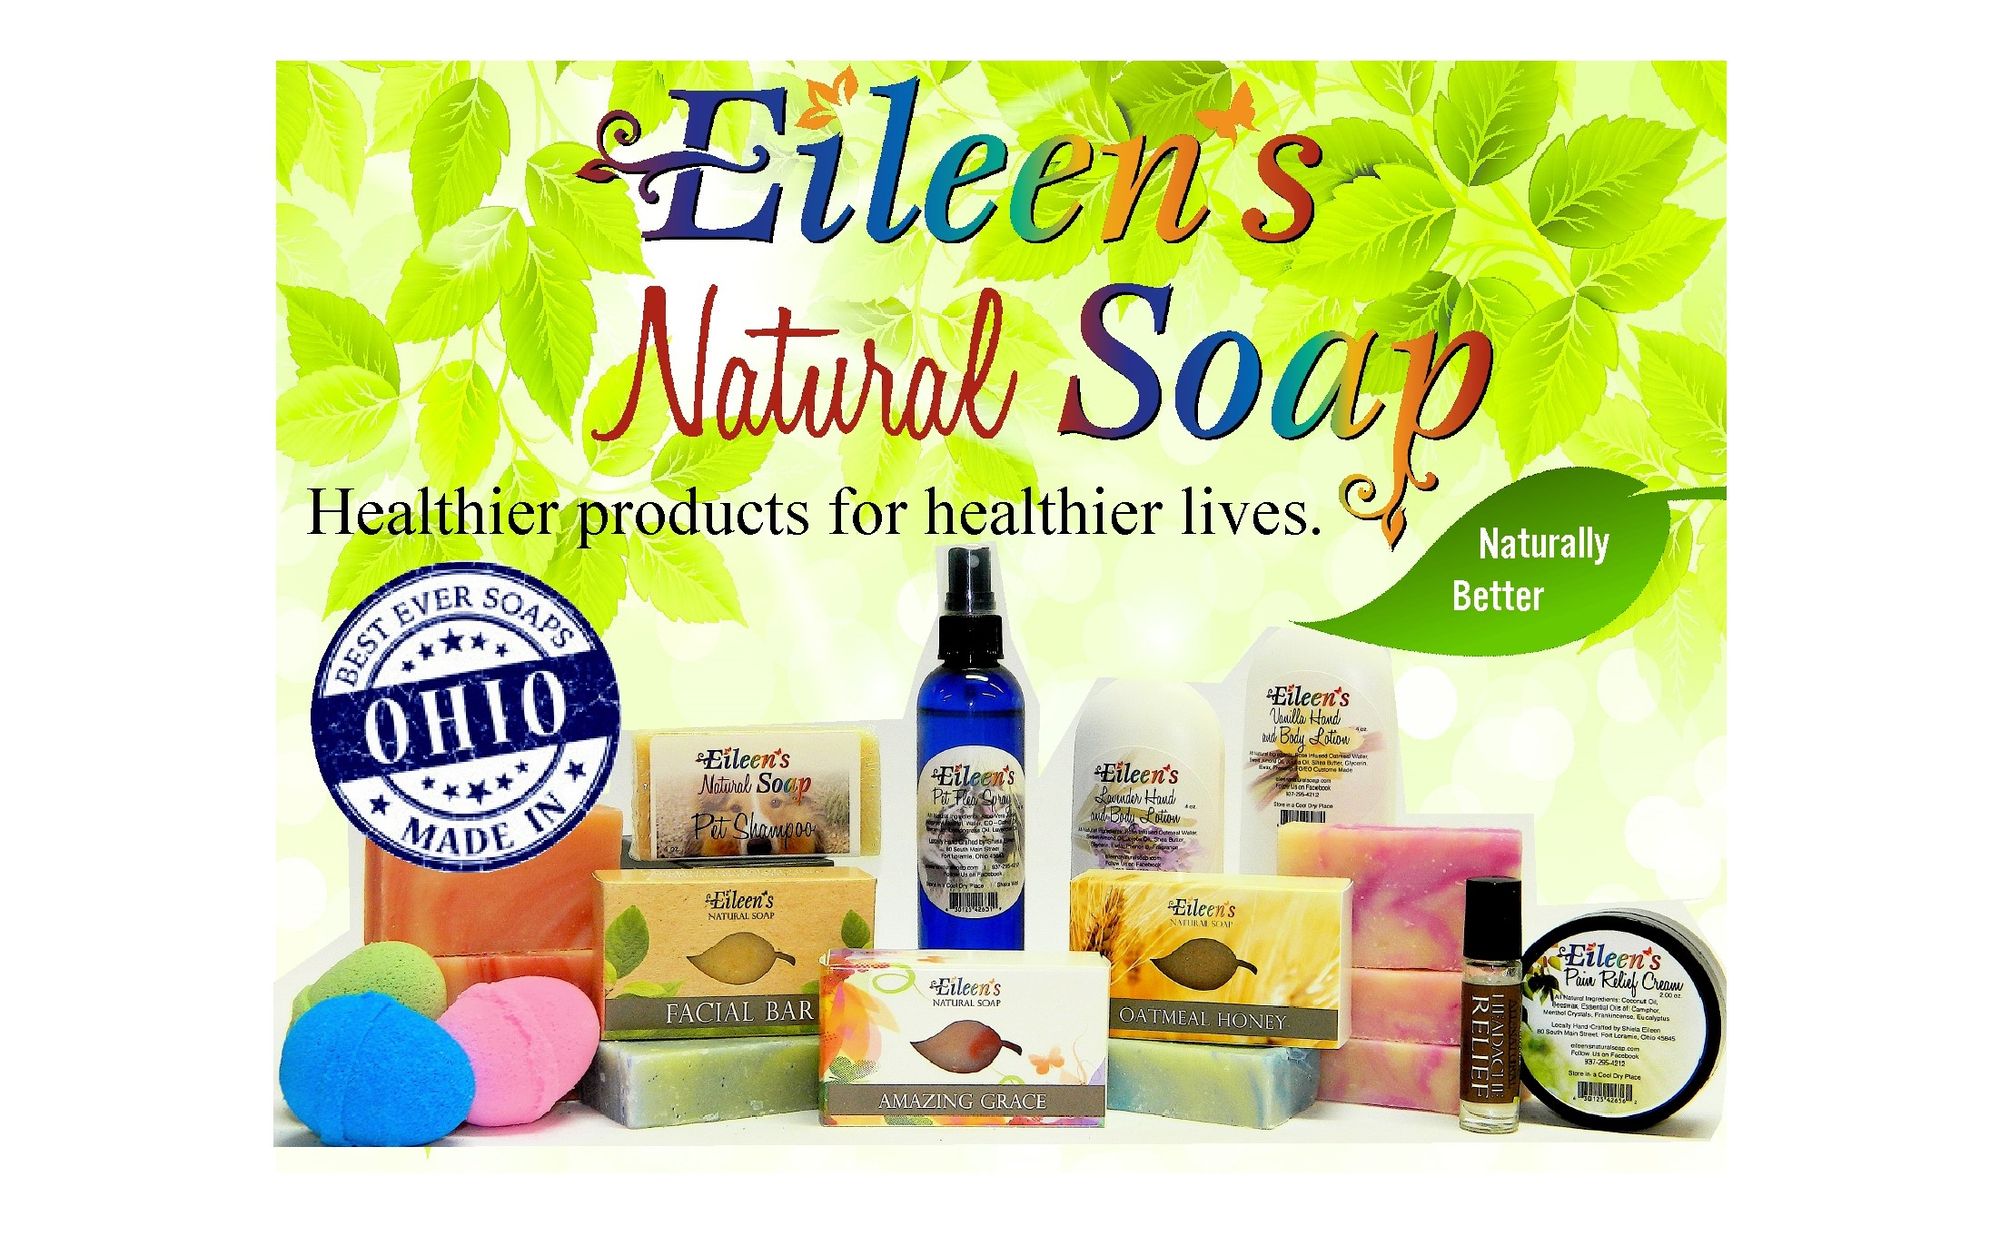 Healthier Products for Healthier Lives - Eileen's Natural Soap